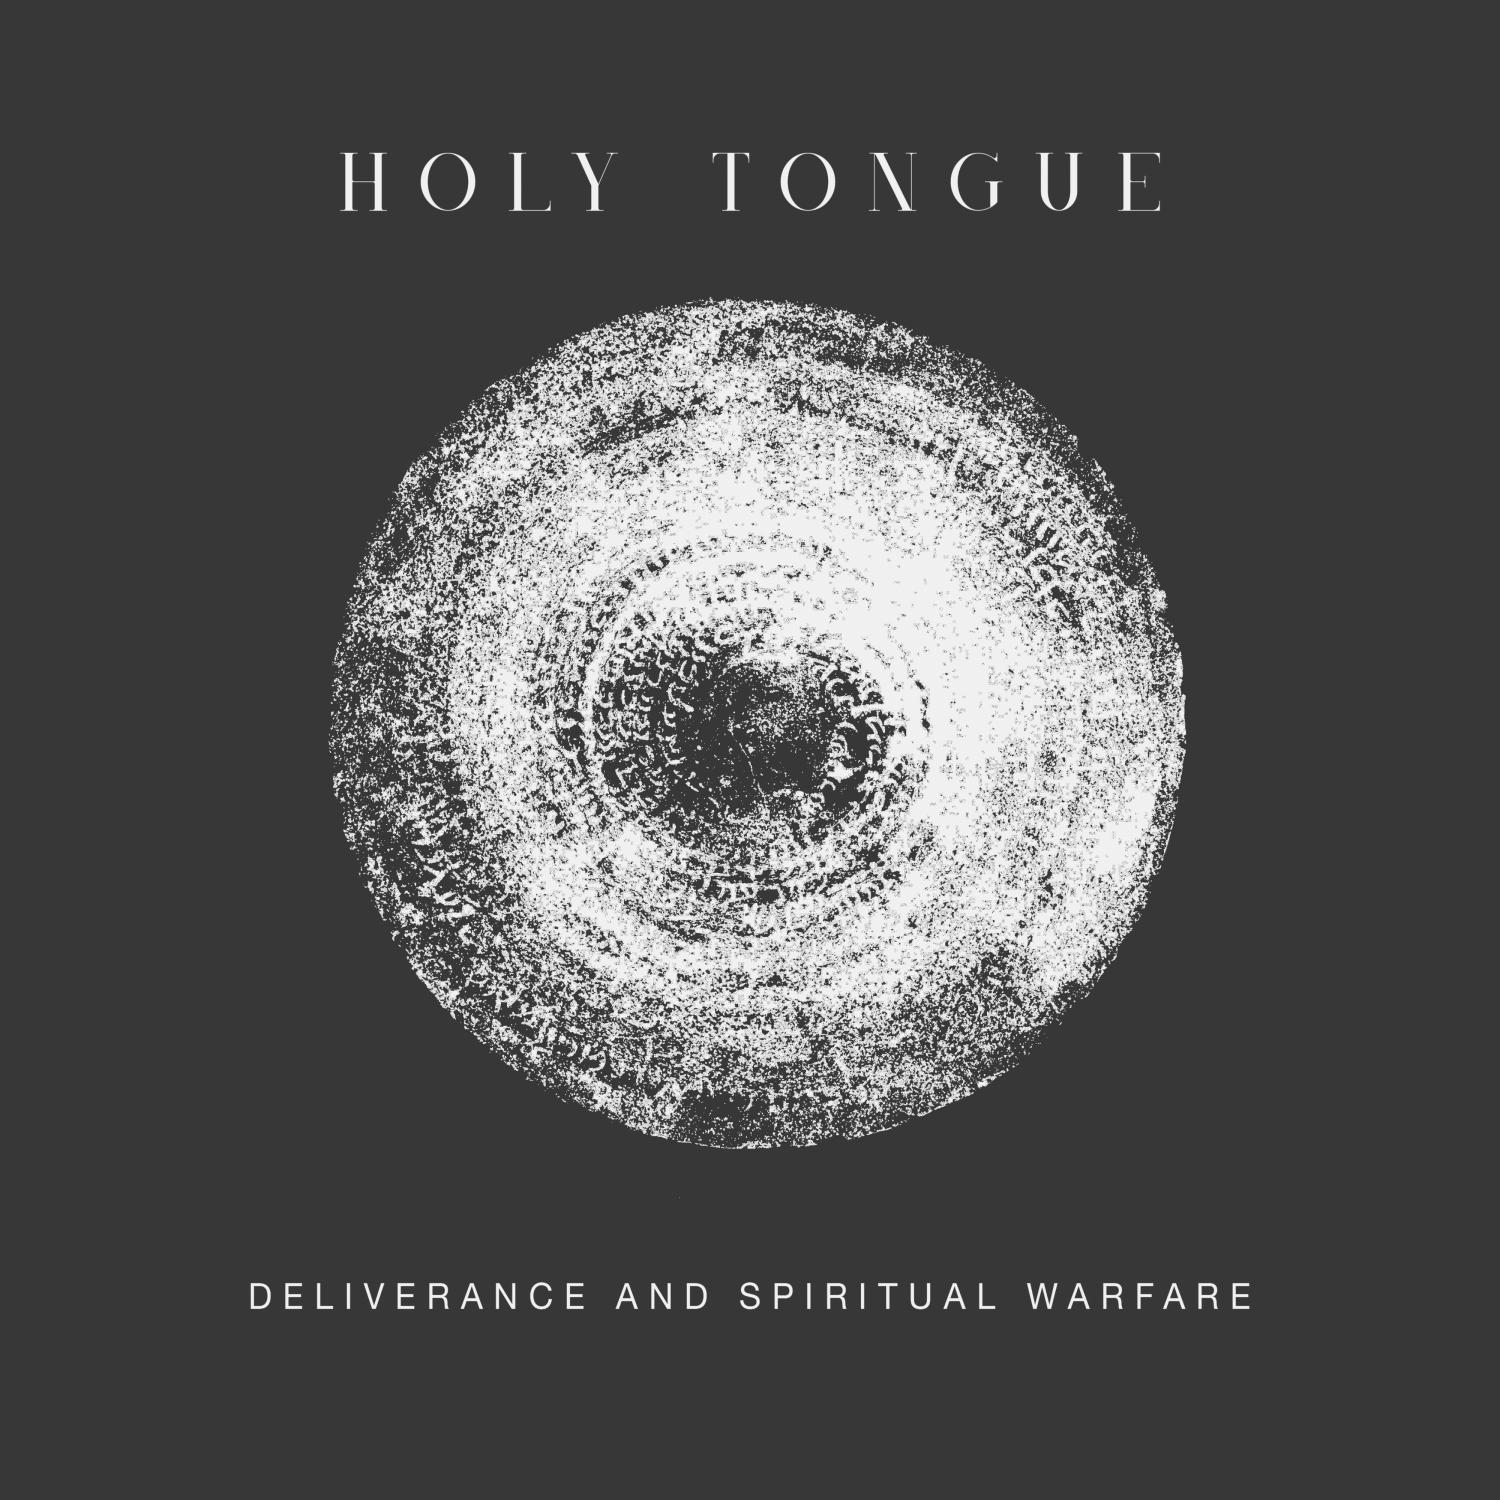 Holy Tongue - Our Tongue Is Furred With the Slime of Creatures